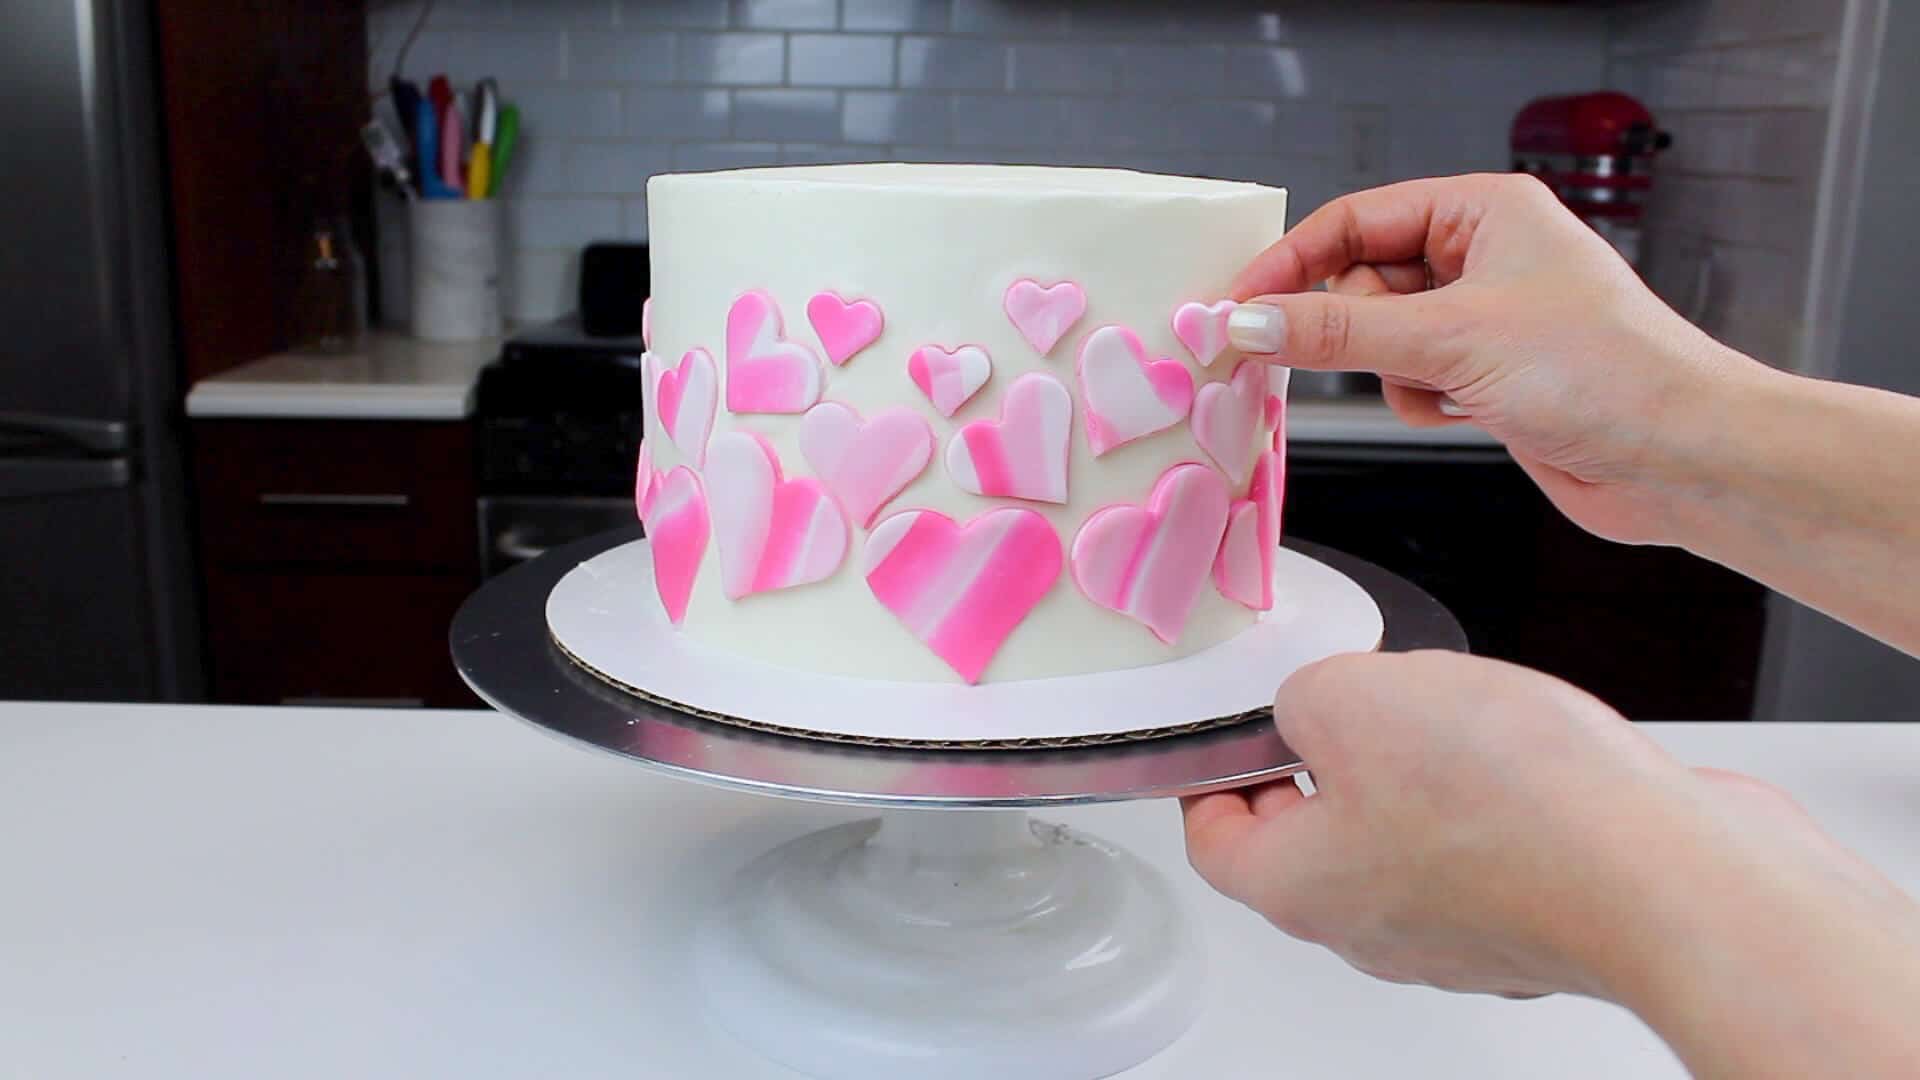 adding hearts to the sides